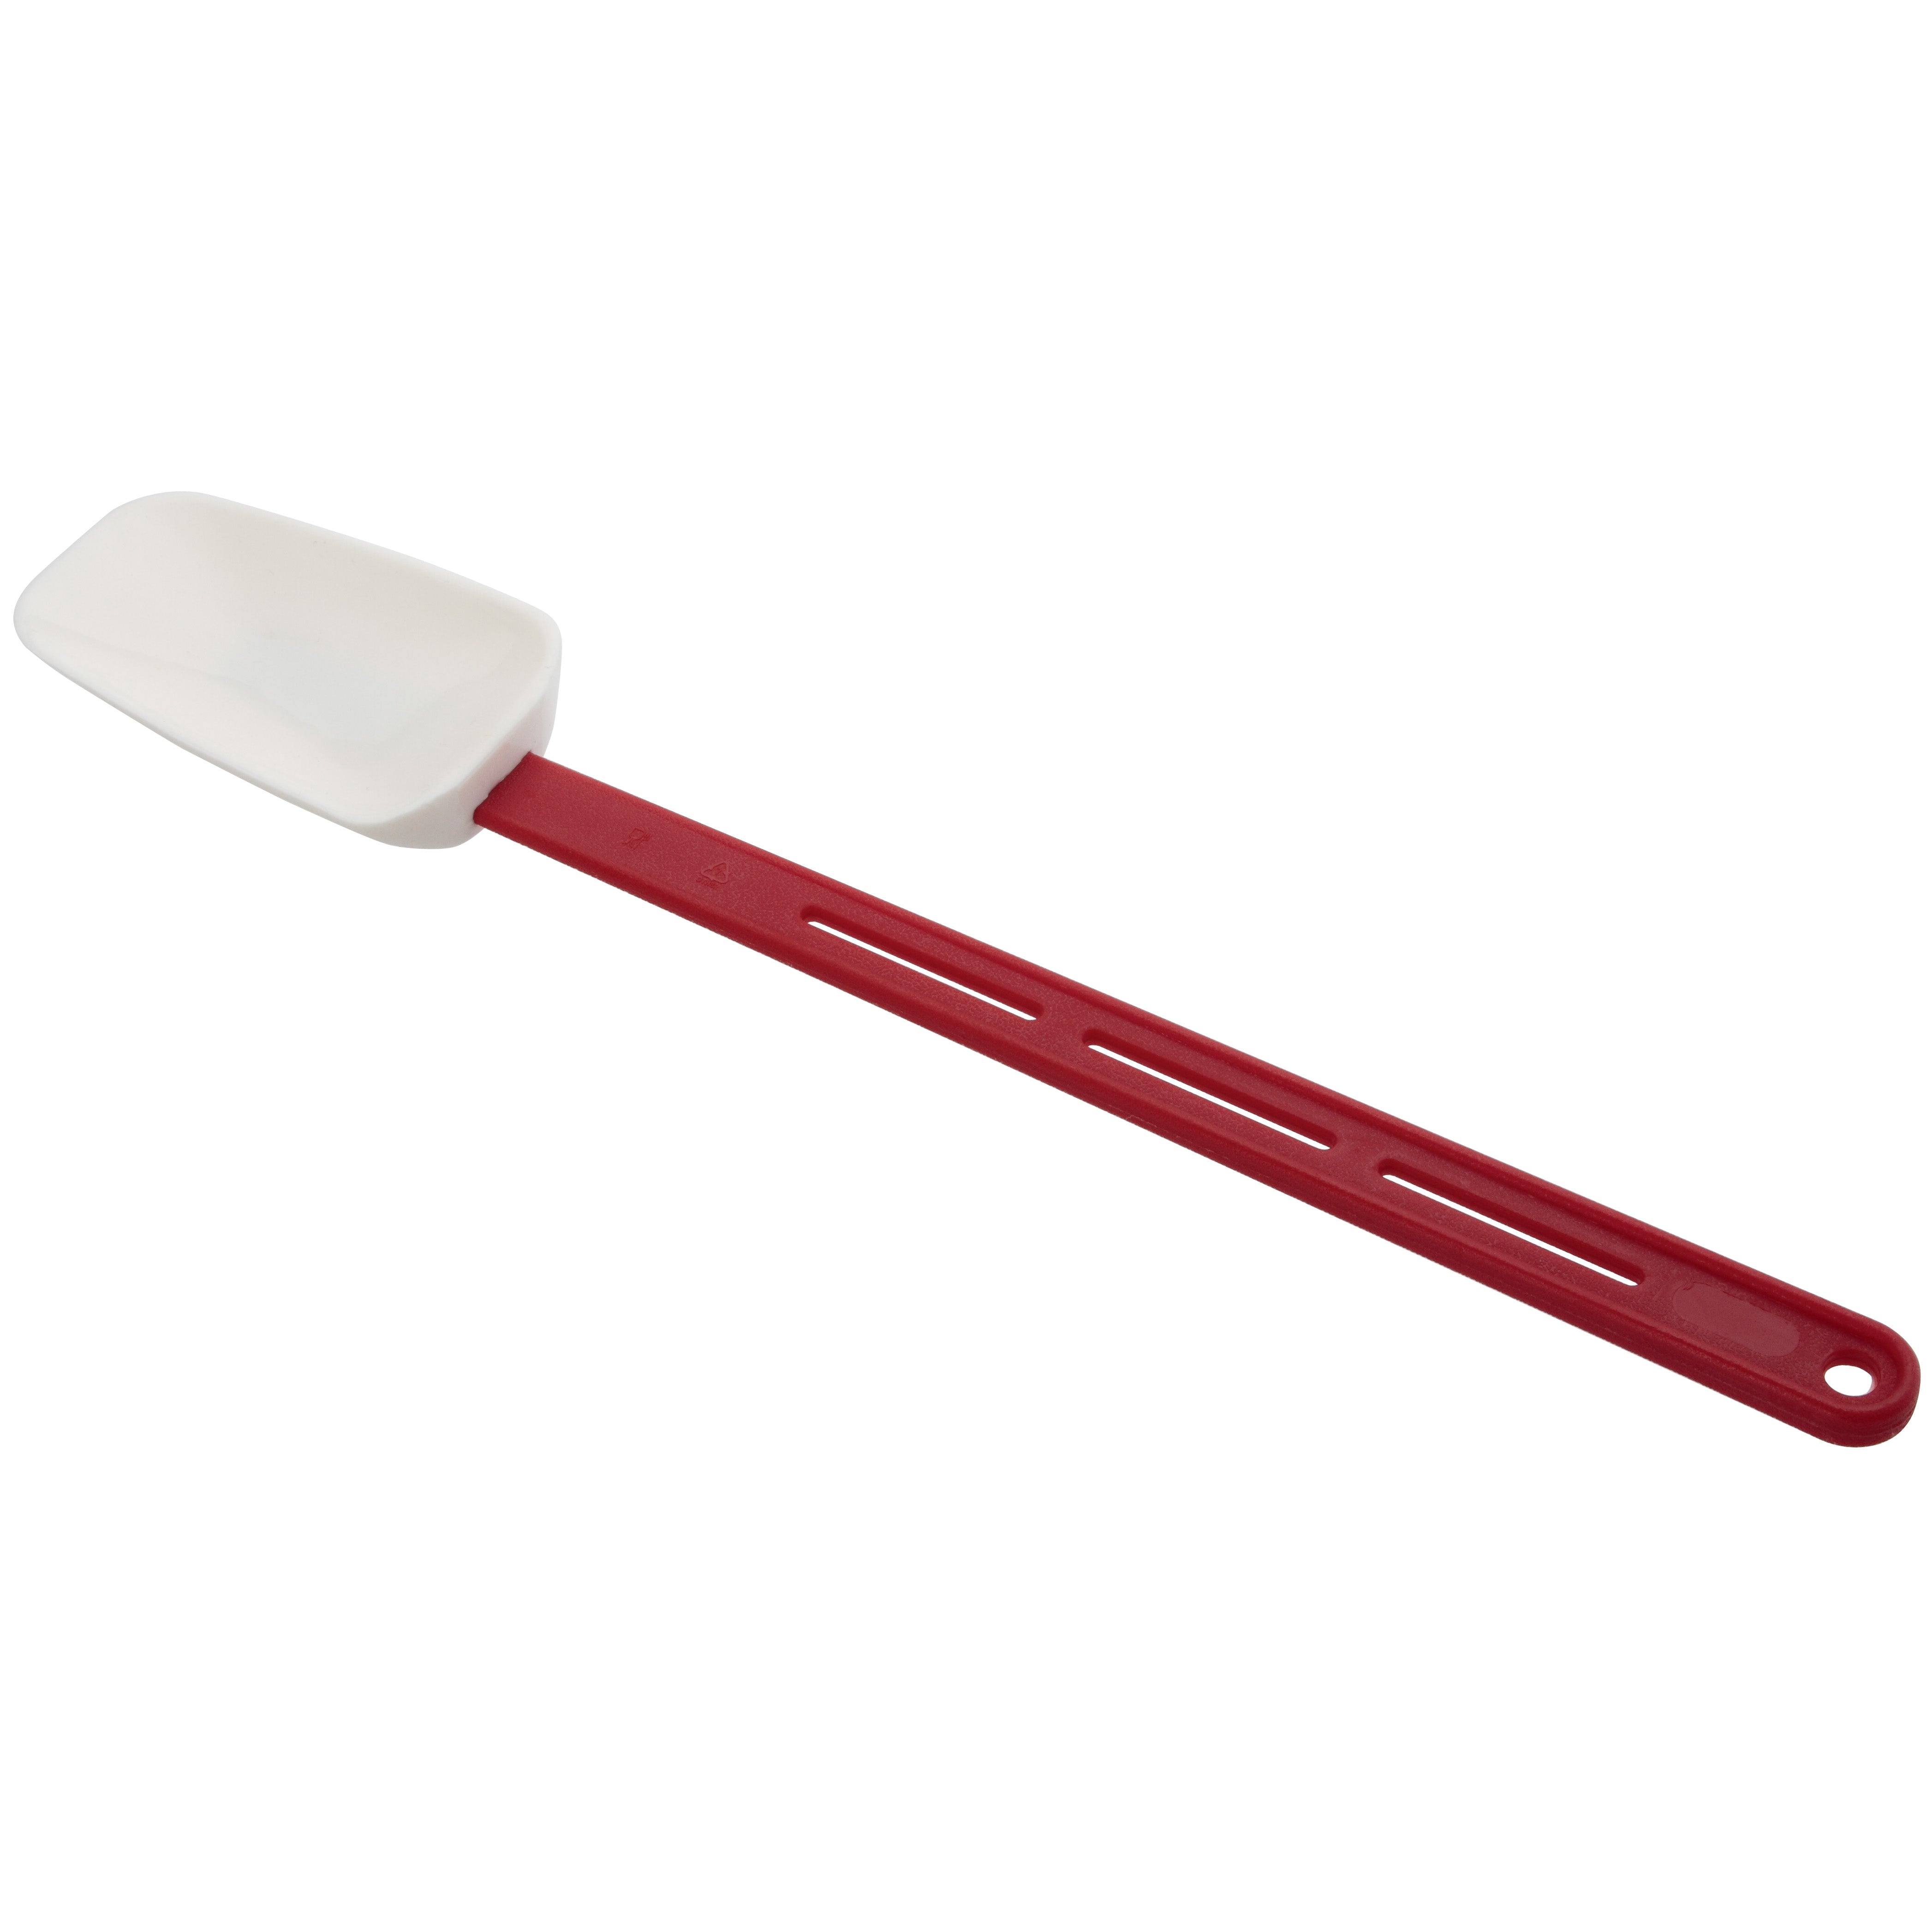 Royal Industries High Heat Silicone Spoon Shaped Spatula